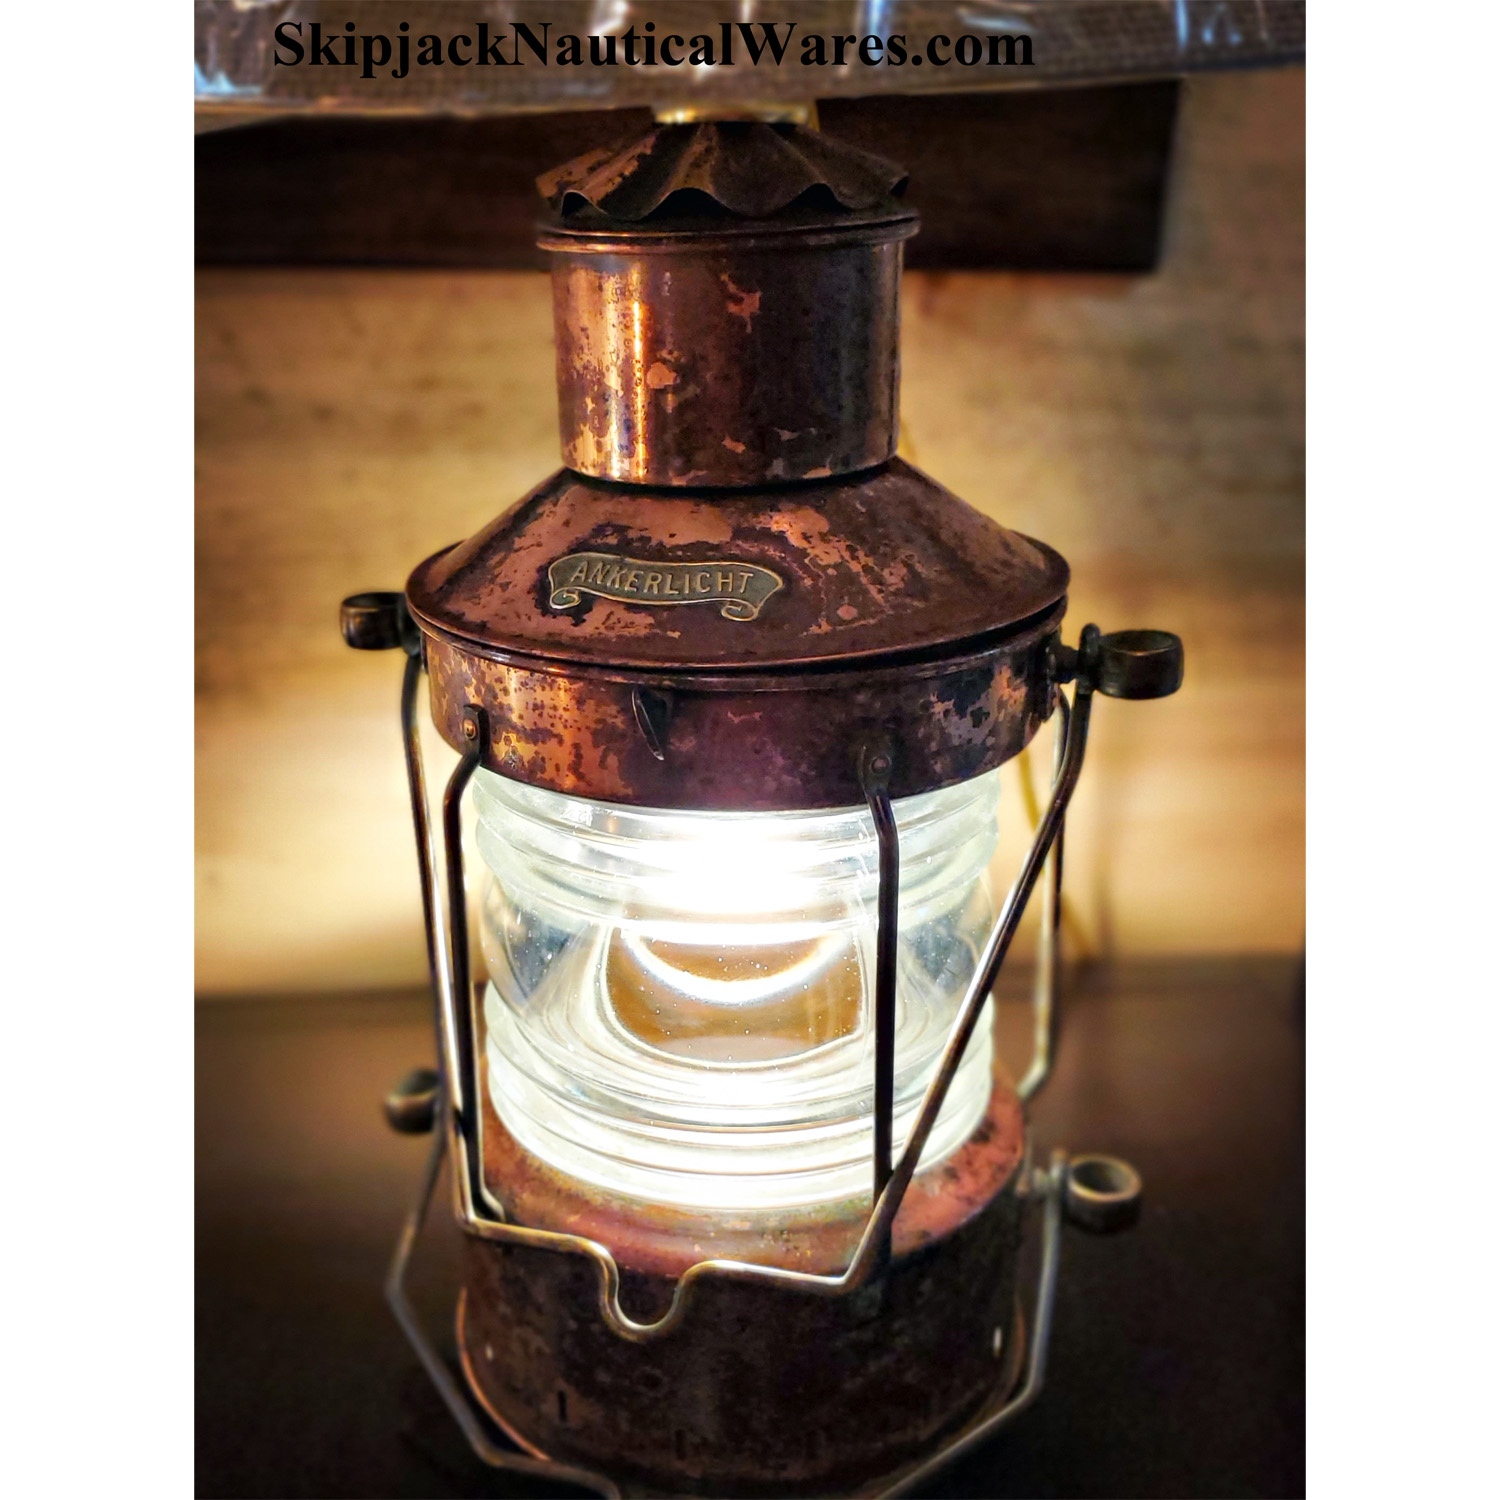 Copper (Ankerlicht) Anchor Lantern Nautical Table Lamp- Lamps & Lighting:  Skipjack Nautical Wares